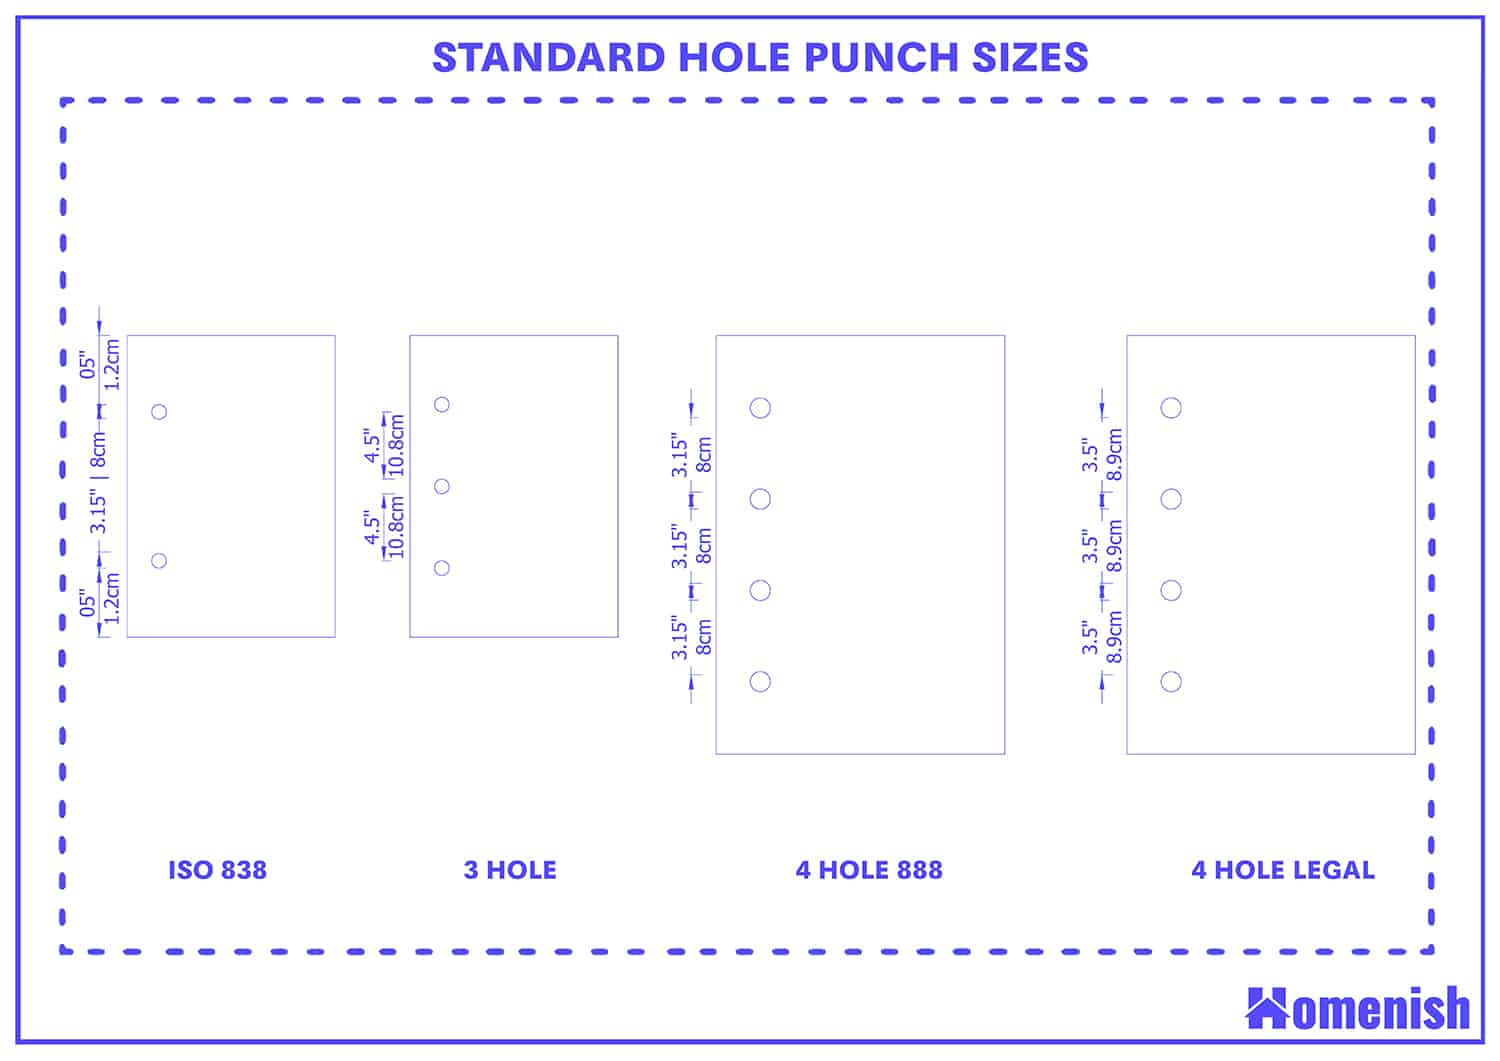 Standard Hole Punch Sizes and Guidelines (with Drawings) Homenish